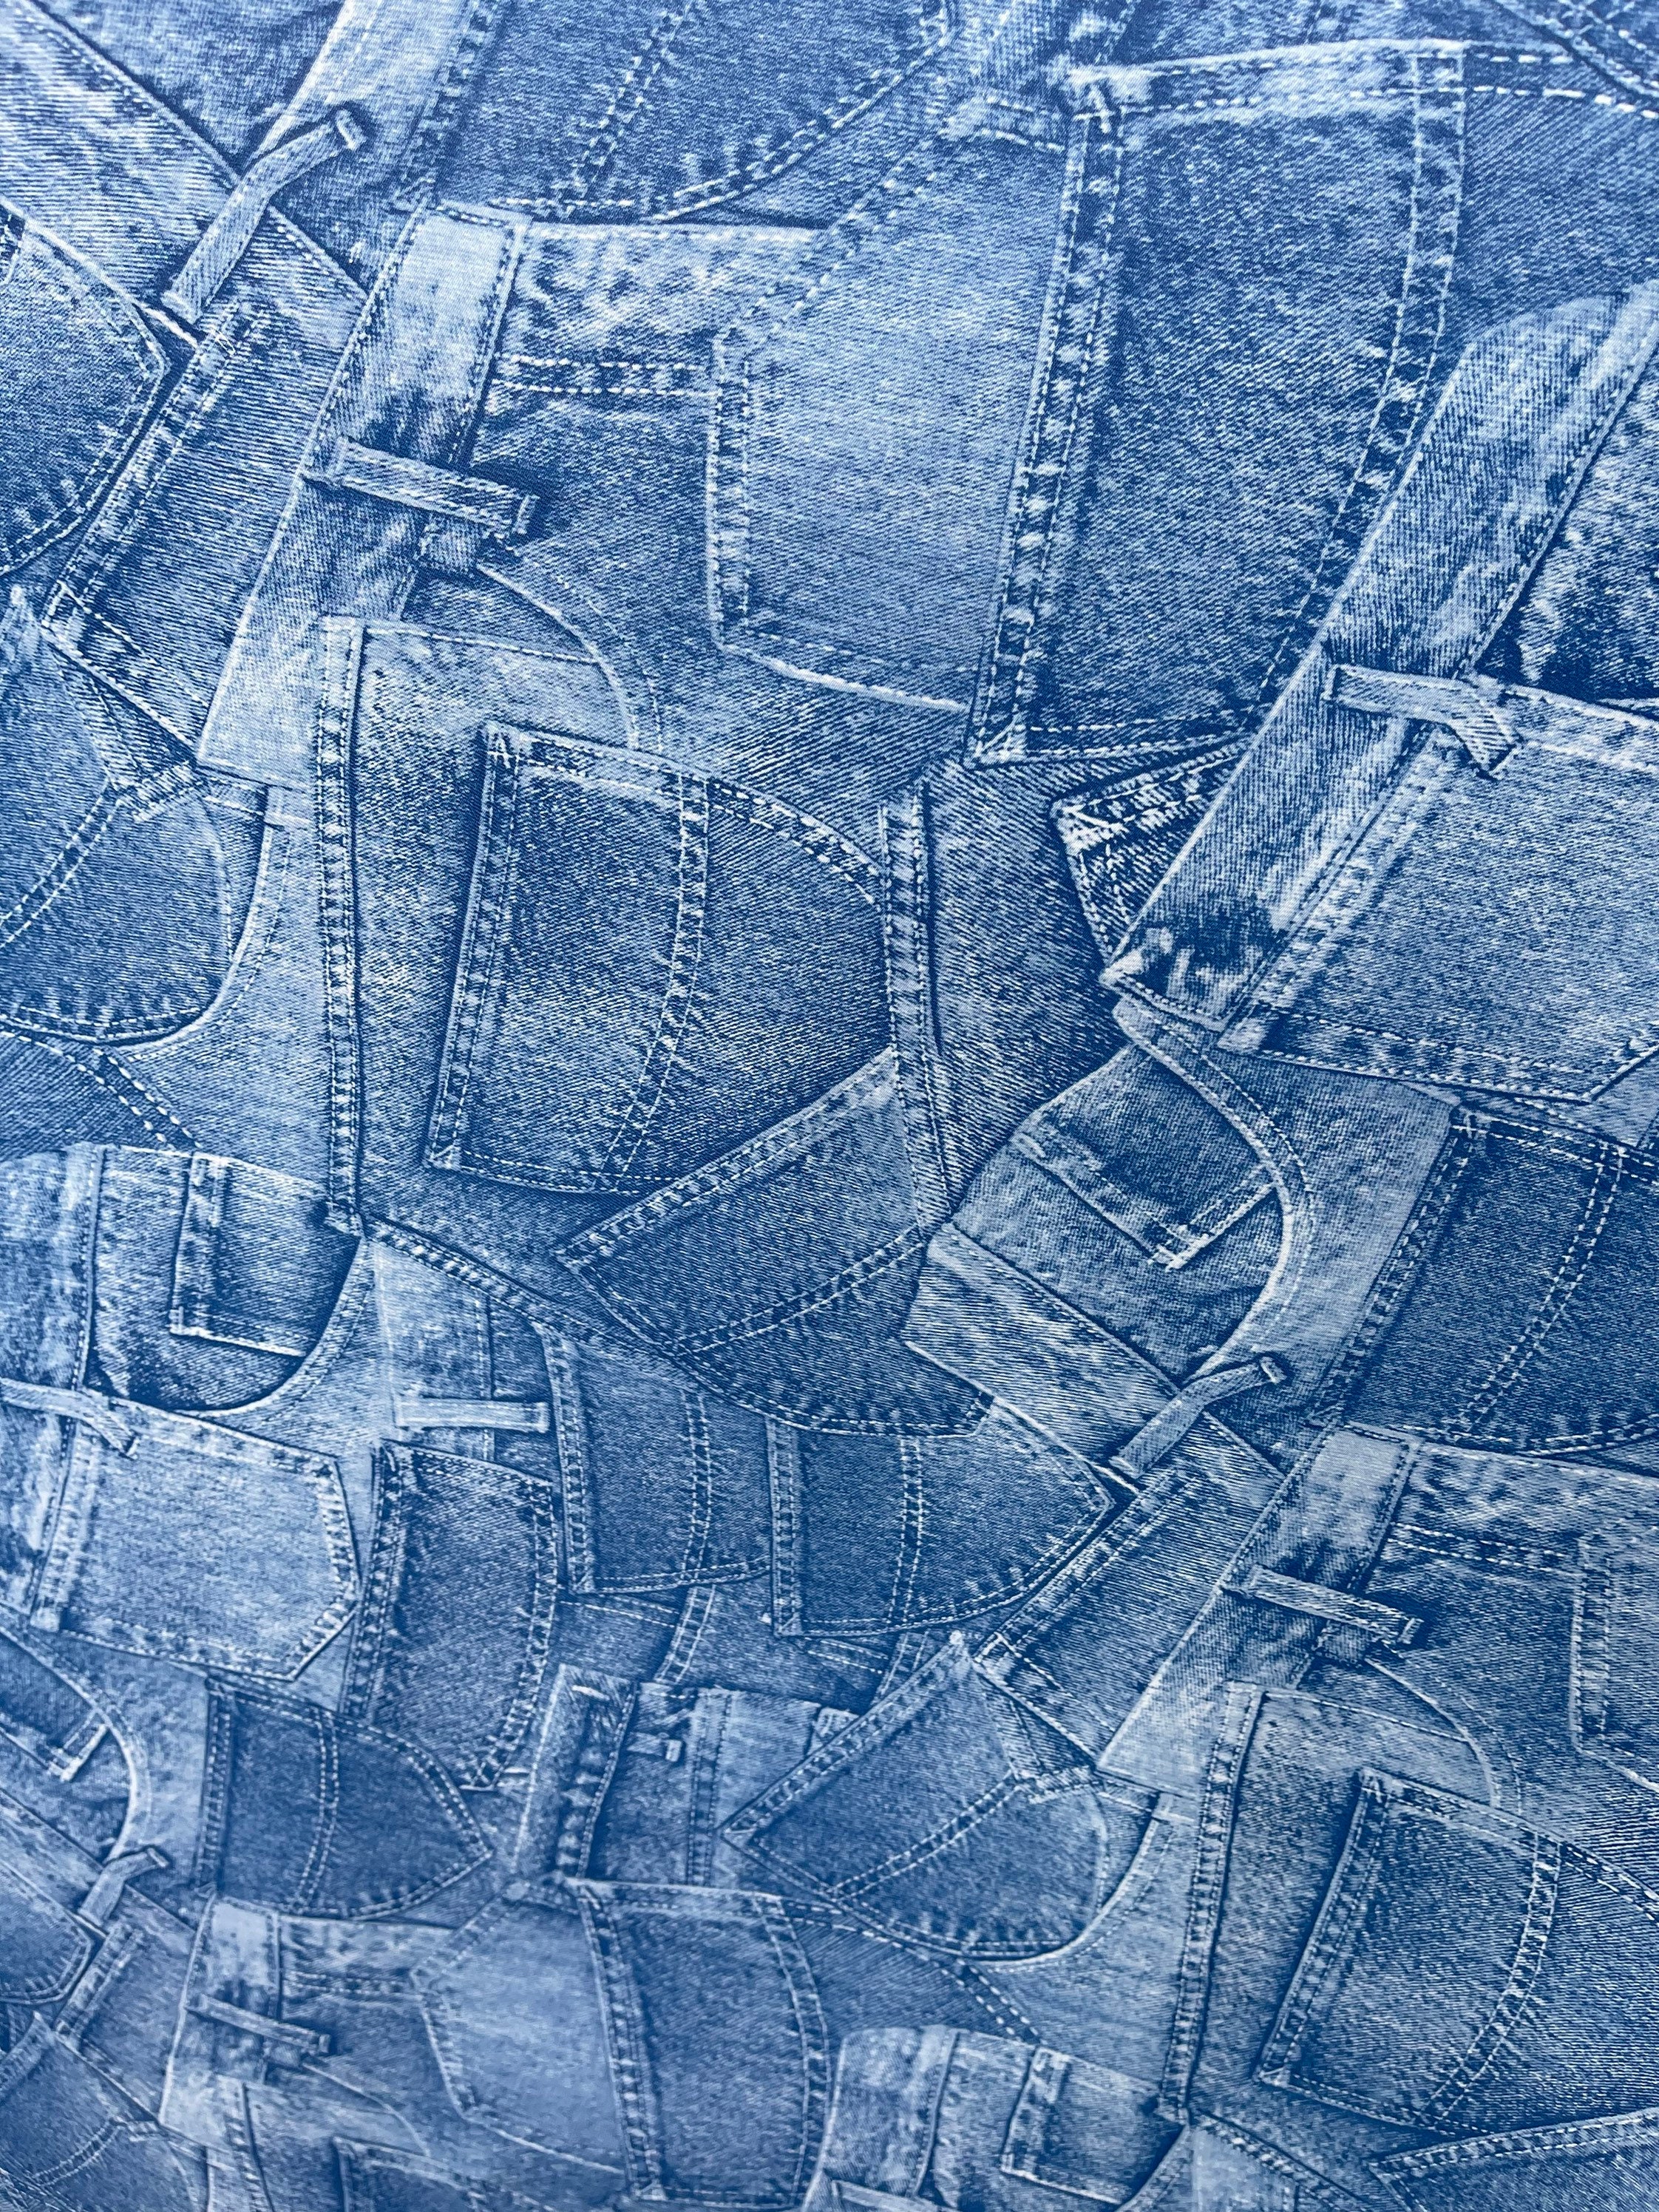 Jeans Design Denim Looking Print on Vinyl Non Stretch Heavy Weight 58/60  Sold by the YD. Ships Worldwide From Los Angeles California USA. -   Canada